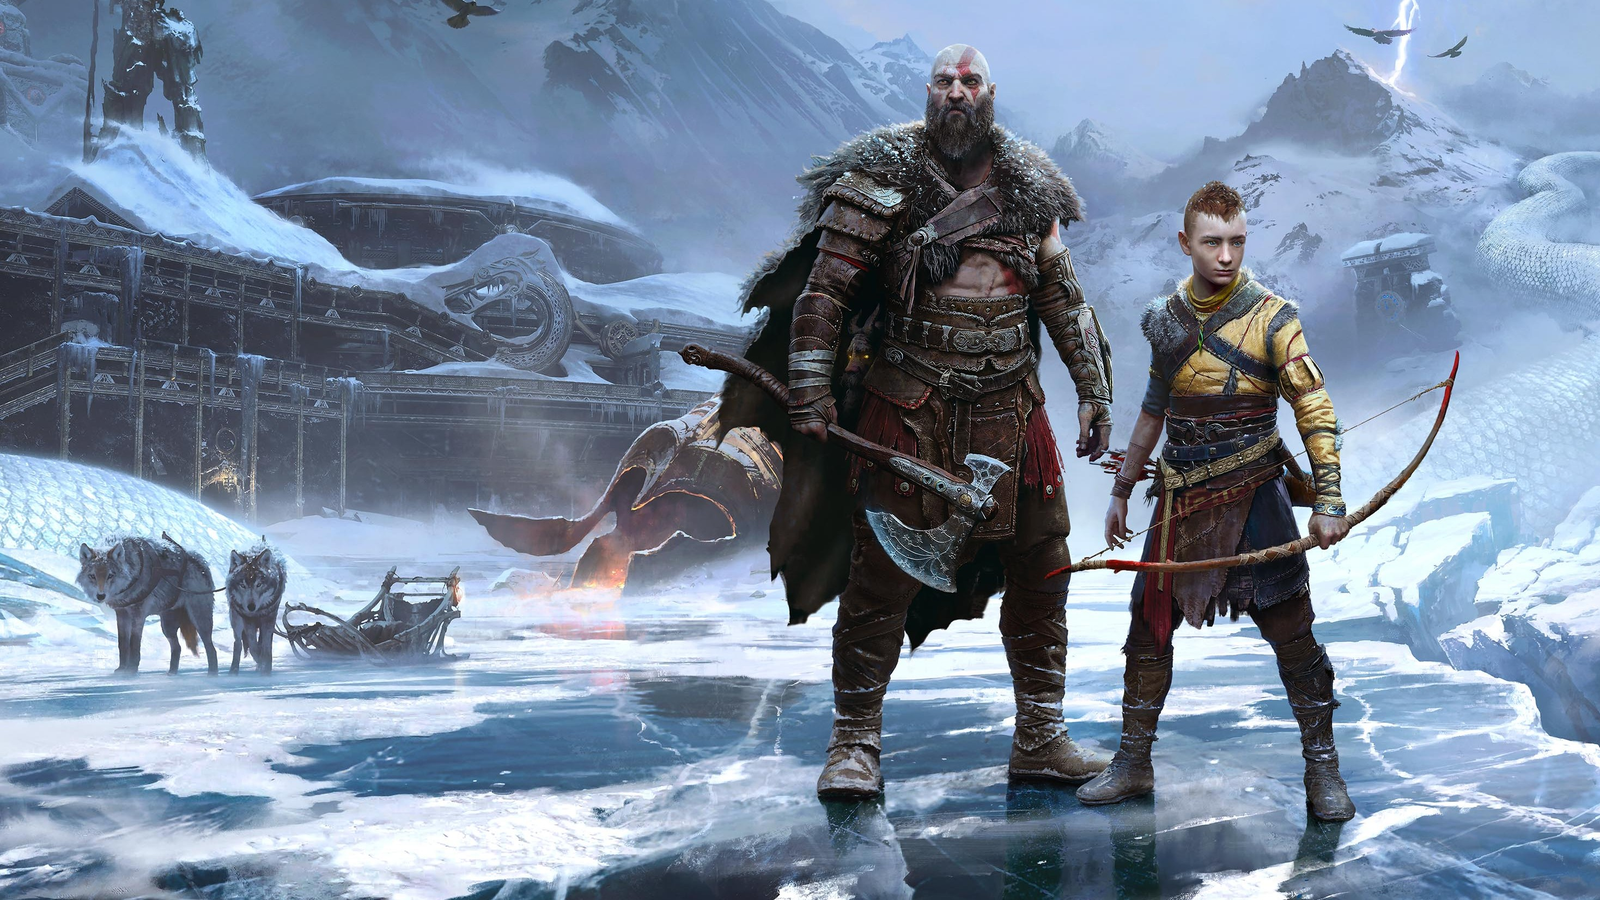 PS Plus needs these forgotten God of War games before Ragnarok